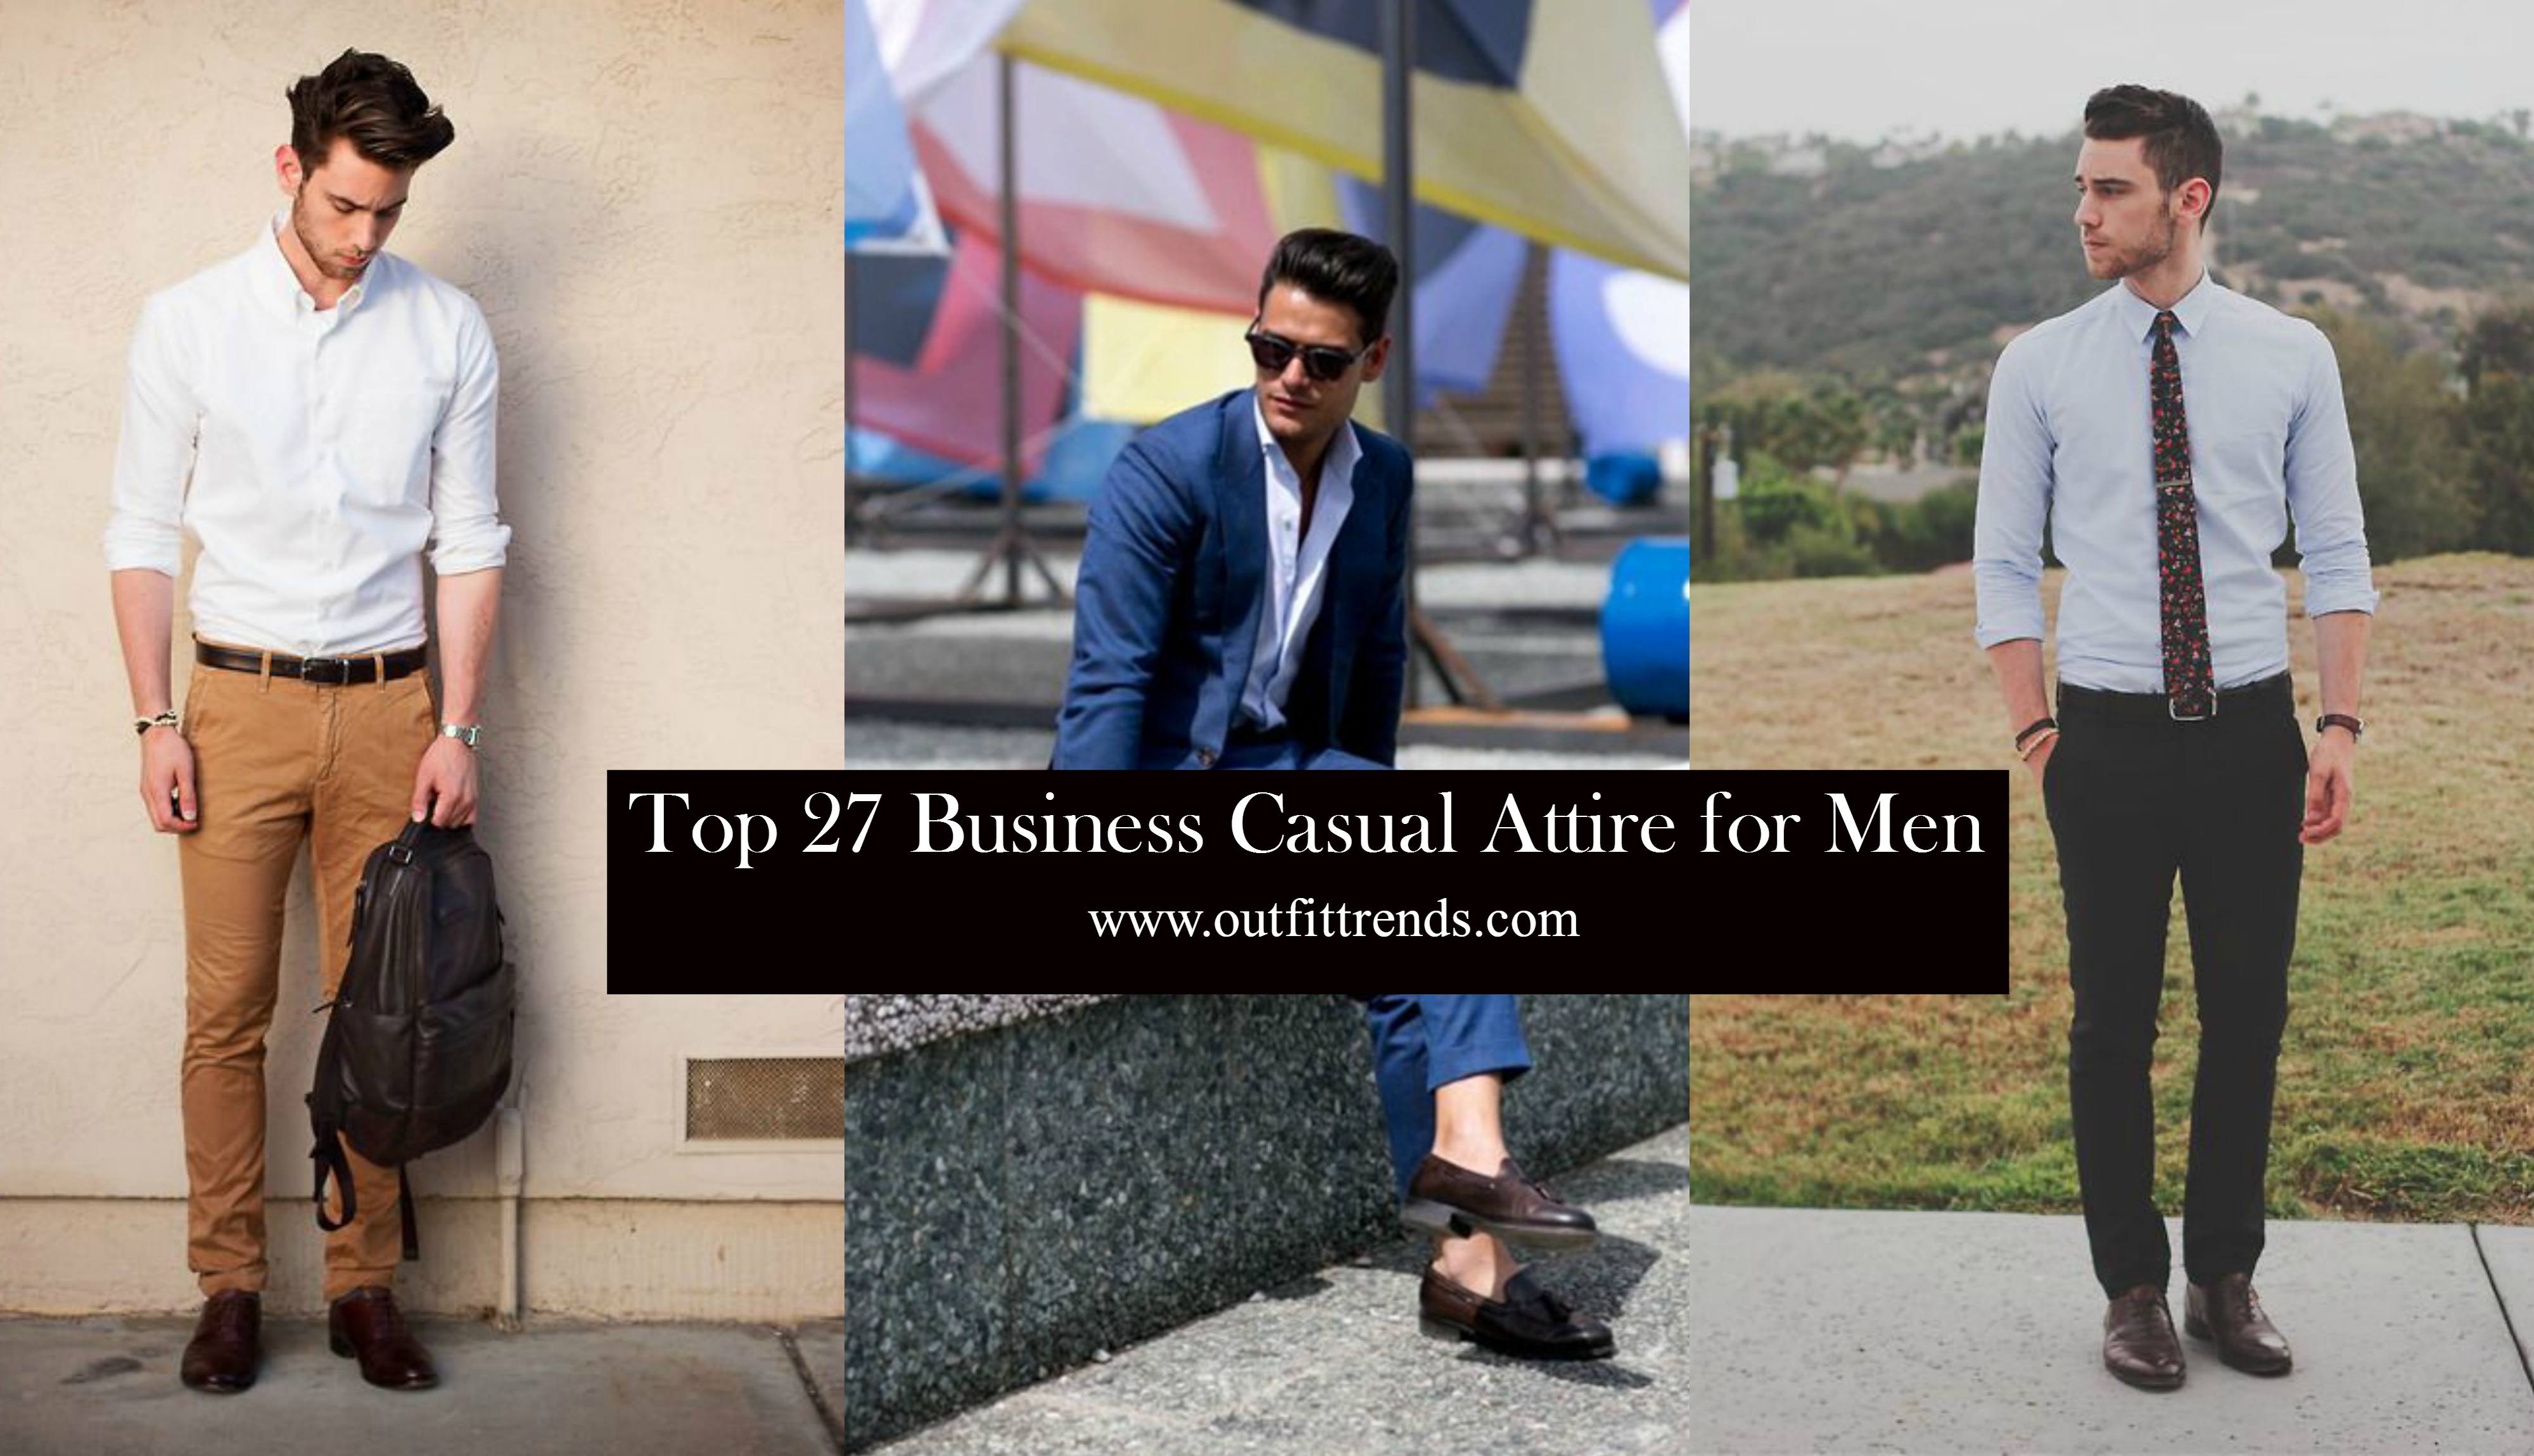 Men's Business Casual Outfits-27 Ideas to Dress Business Casual